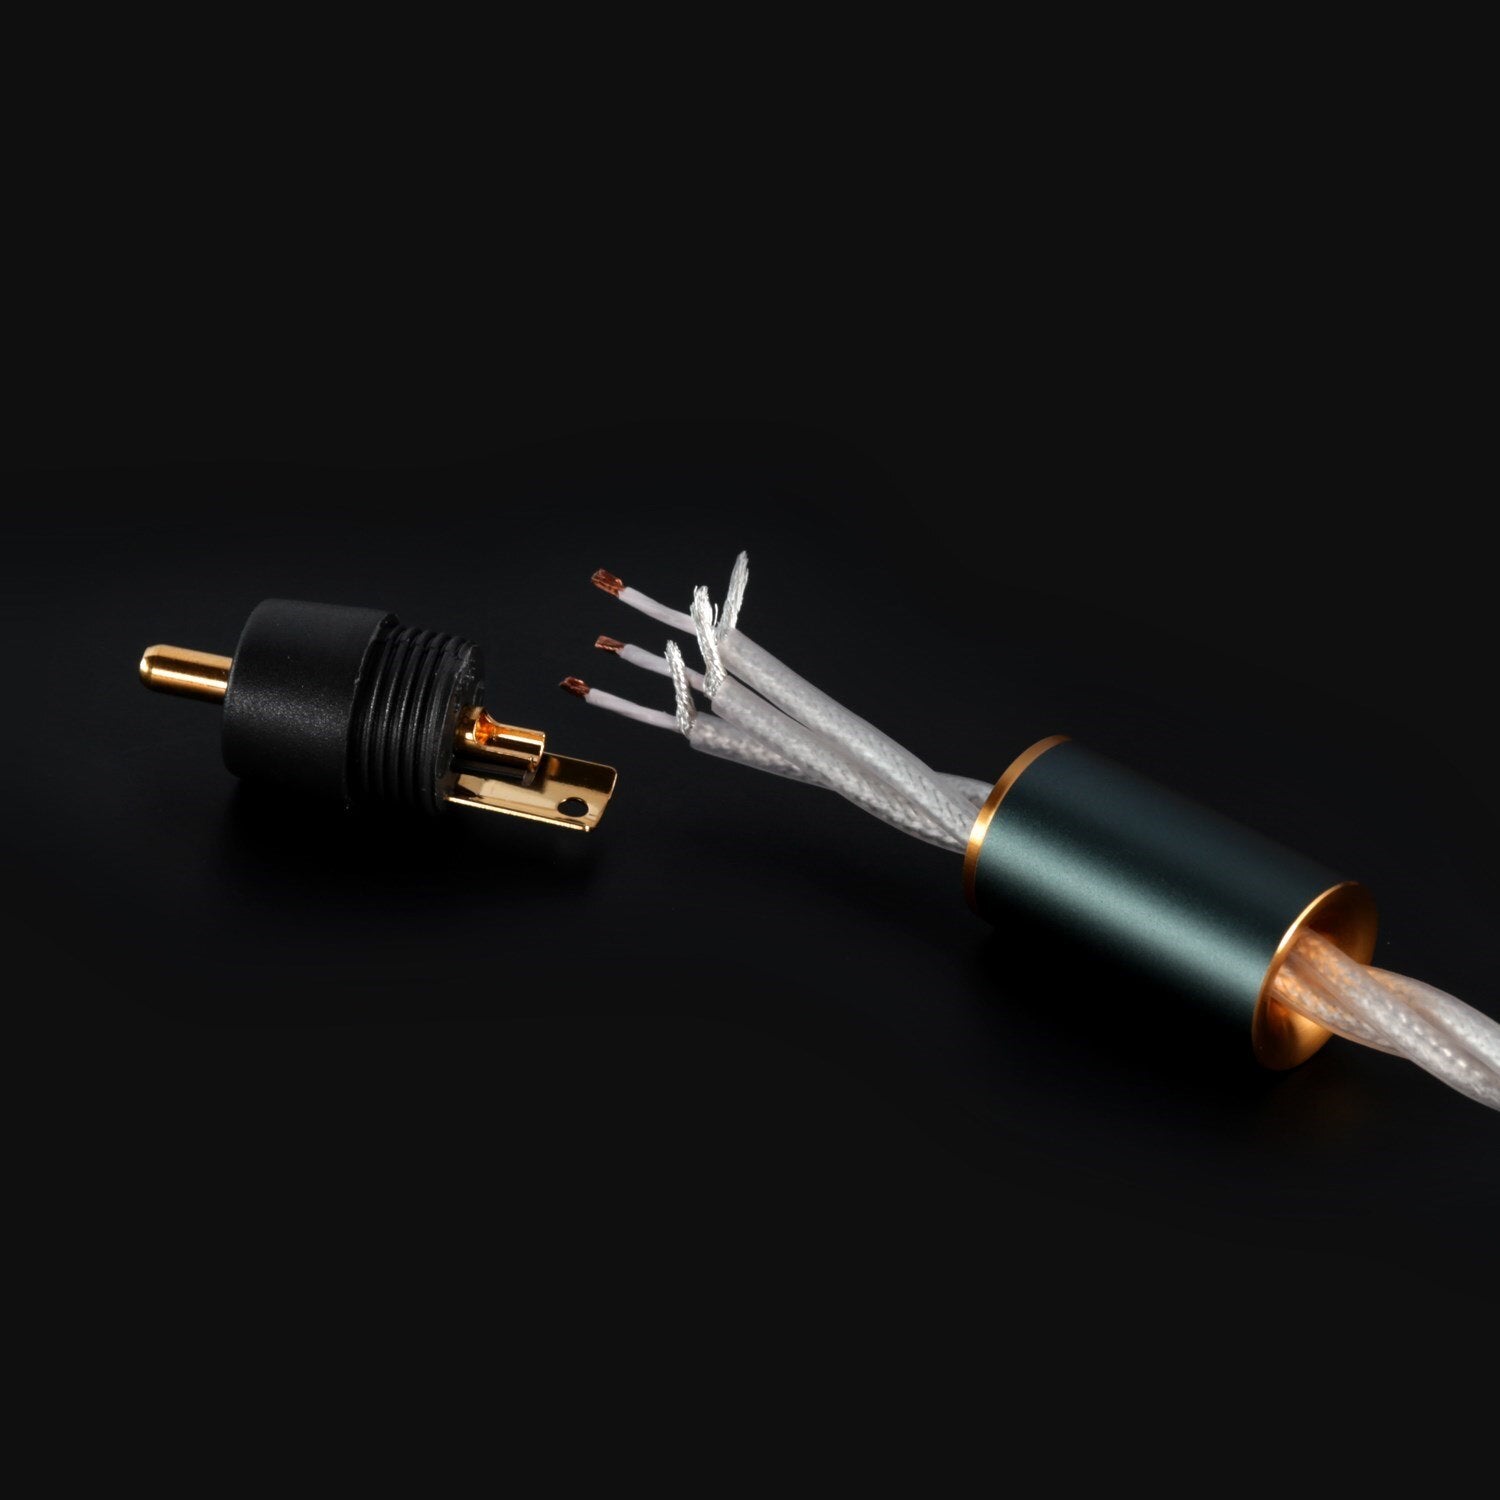 ddHiFi RC20A RCA Signal Cable with PCOCC Conductor for Connecting DACs - The HiFi Cat